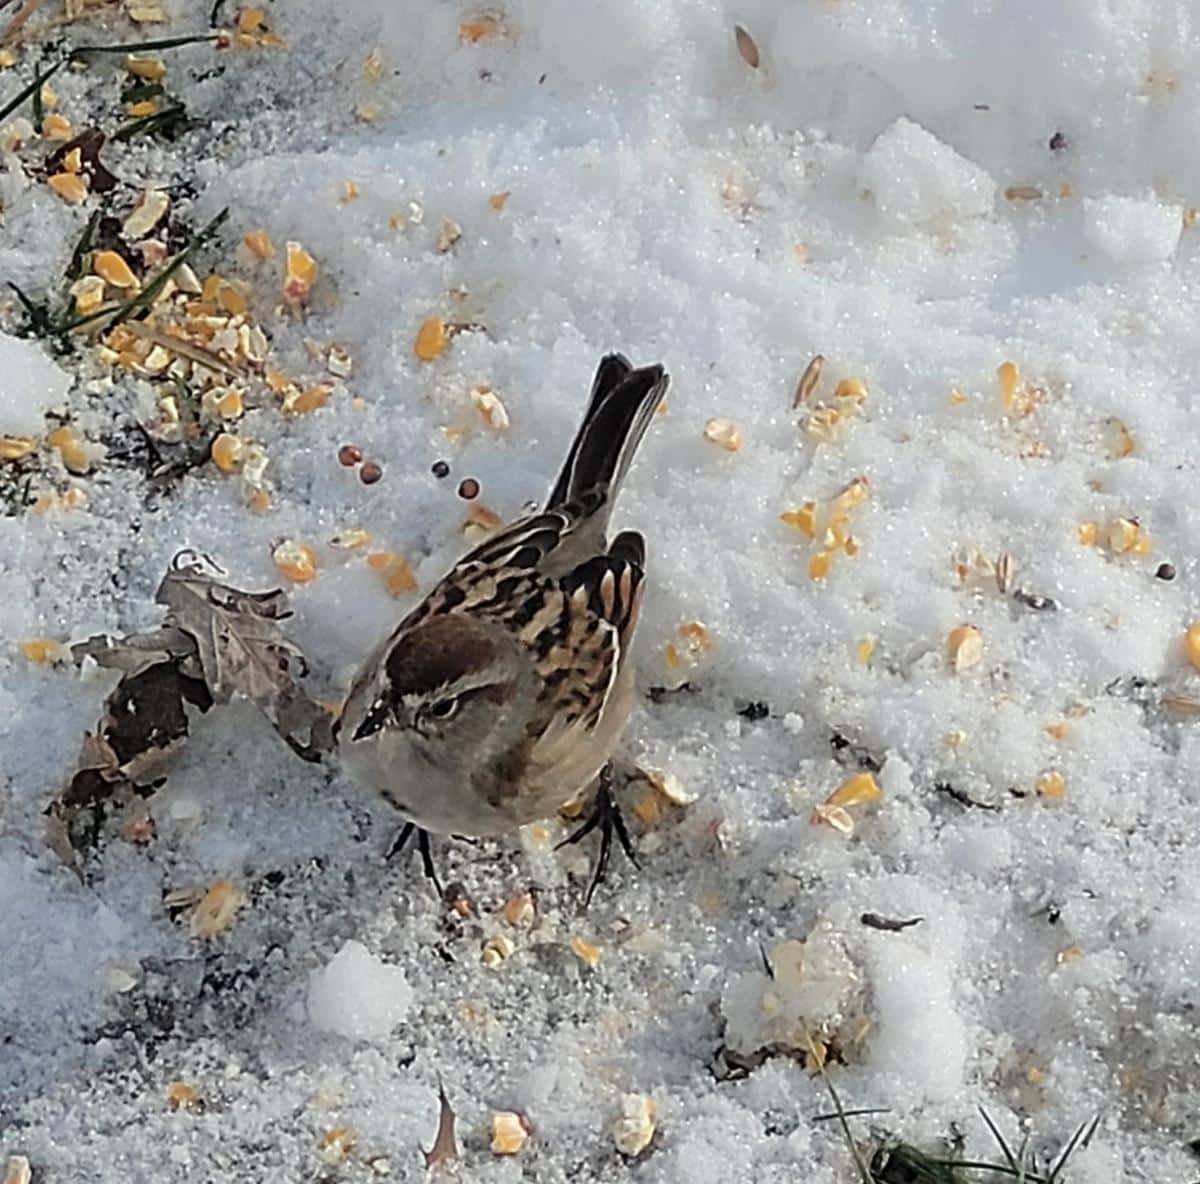 An American Sparrow pecking at food in a backyard